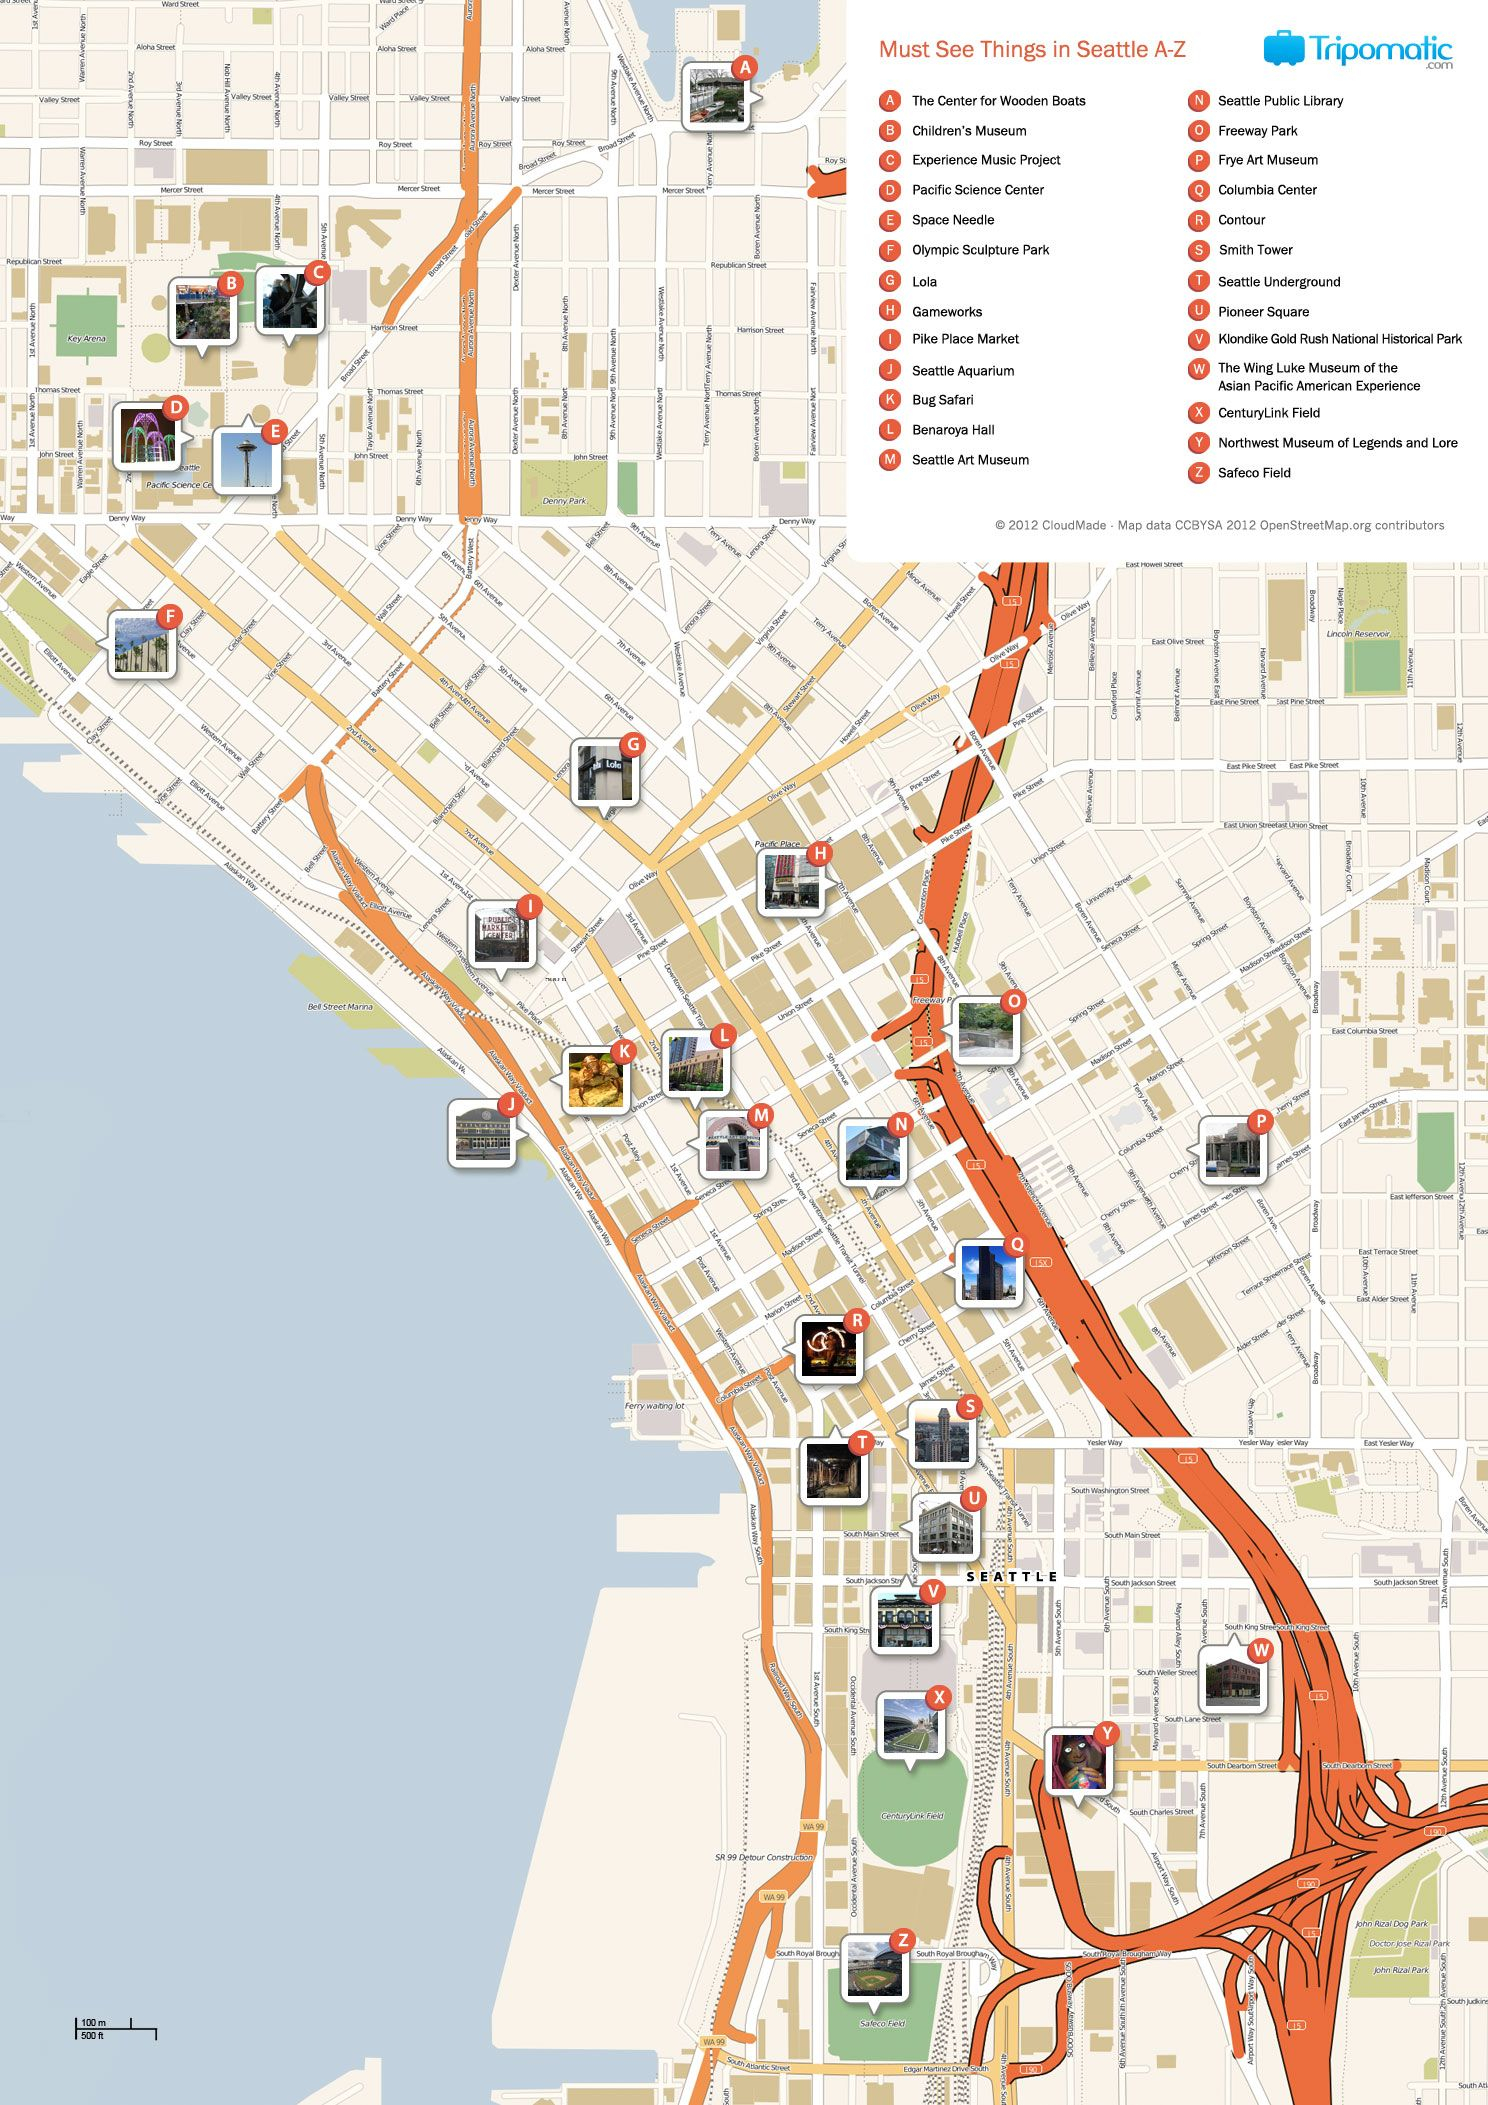 Seattle Printable Tourist Map Seattle Vacation 